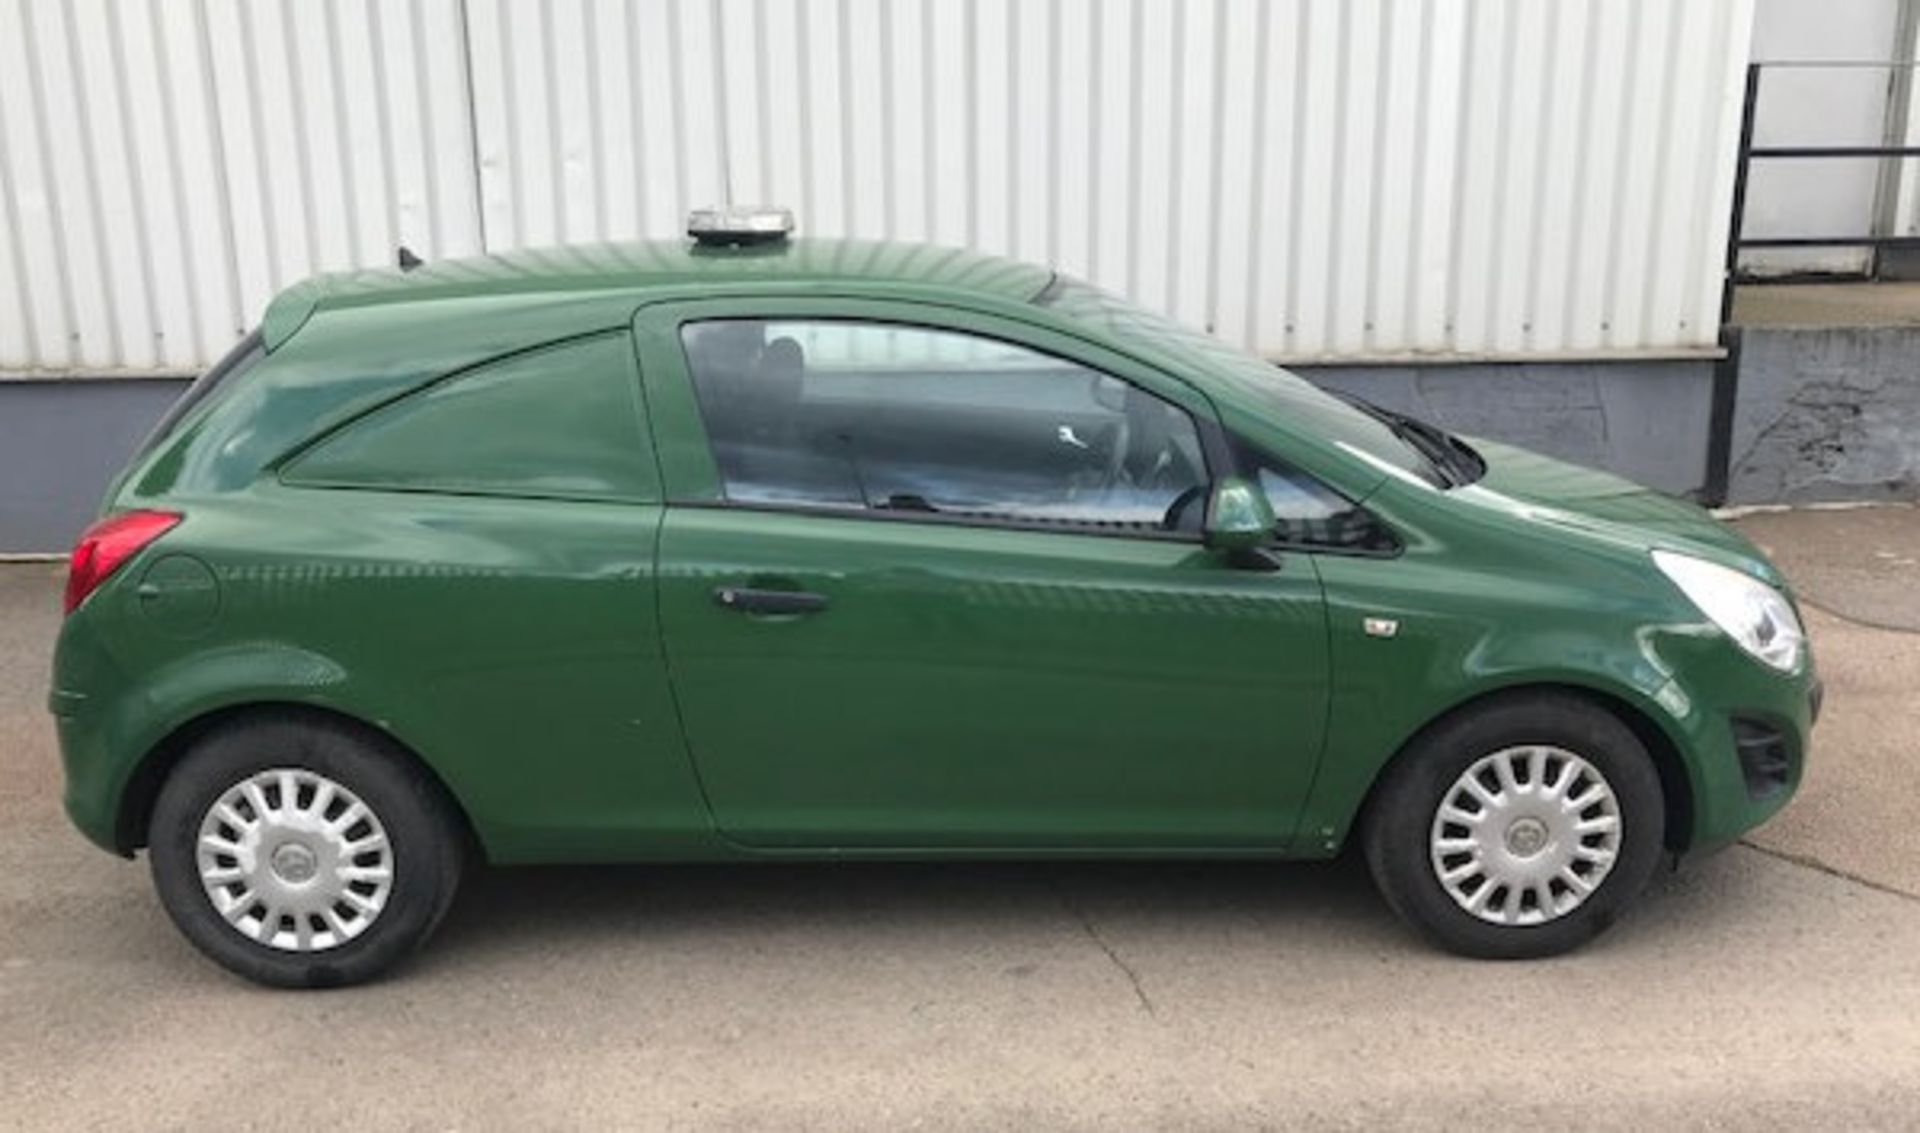 2012 Vauxhall Corsa 1.3 CDTI 3 Dr Panel Van - CL505 - Location: Corby, NorthamptonshireDescription - Image 9 of 11